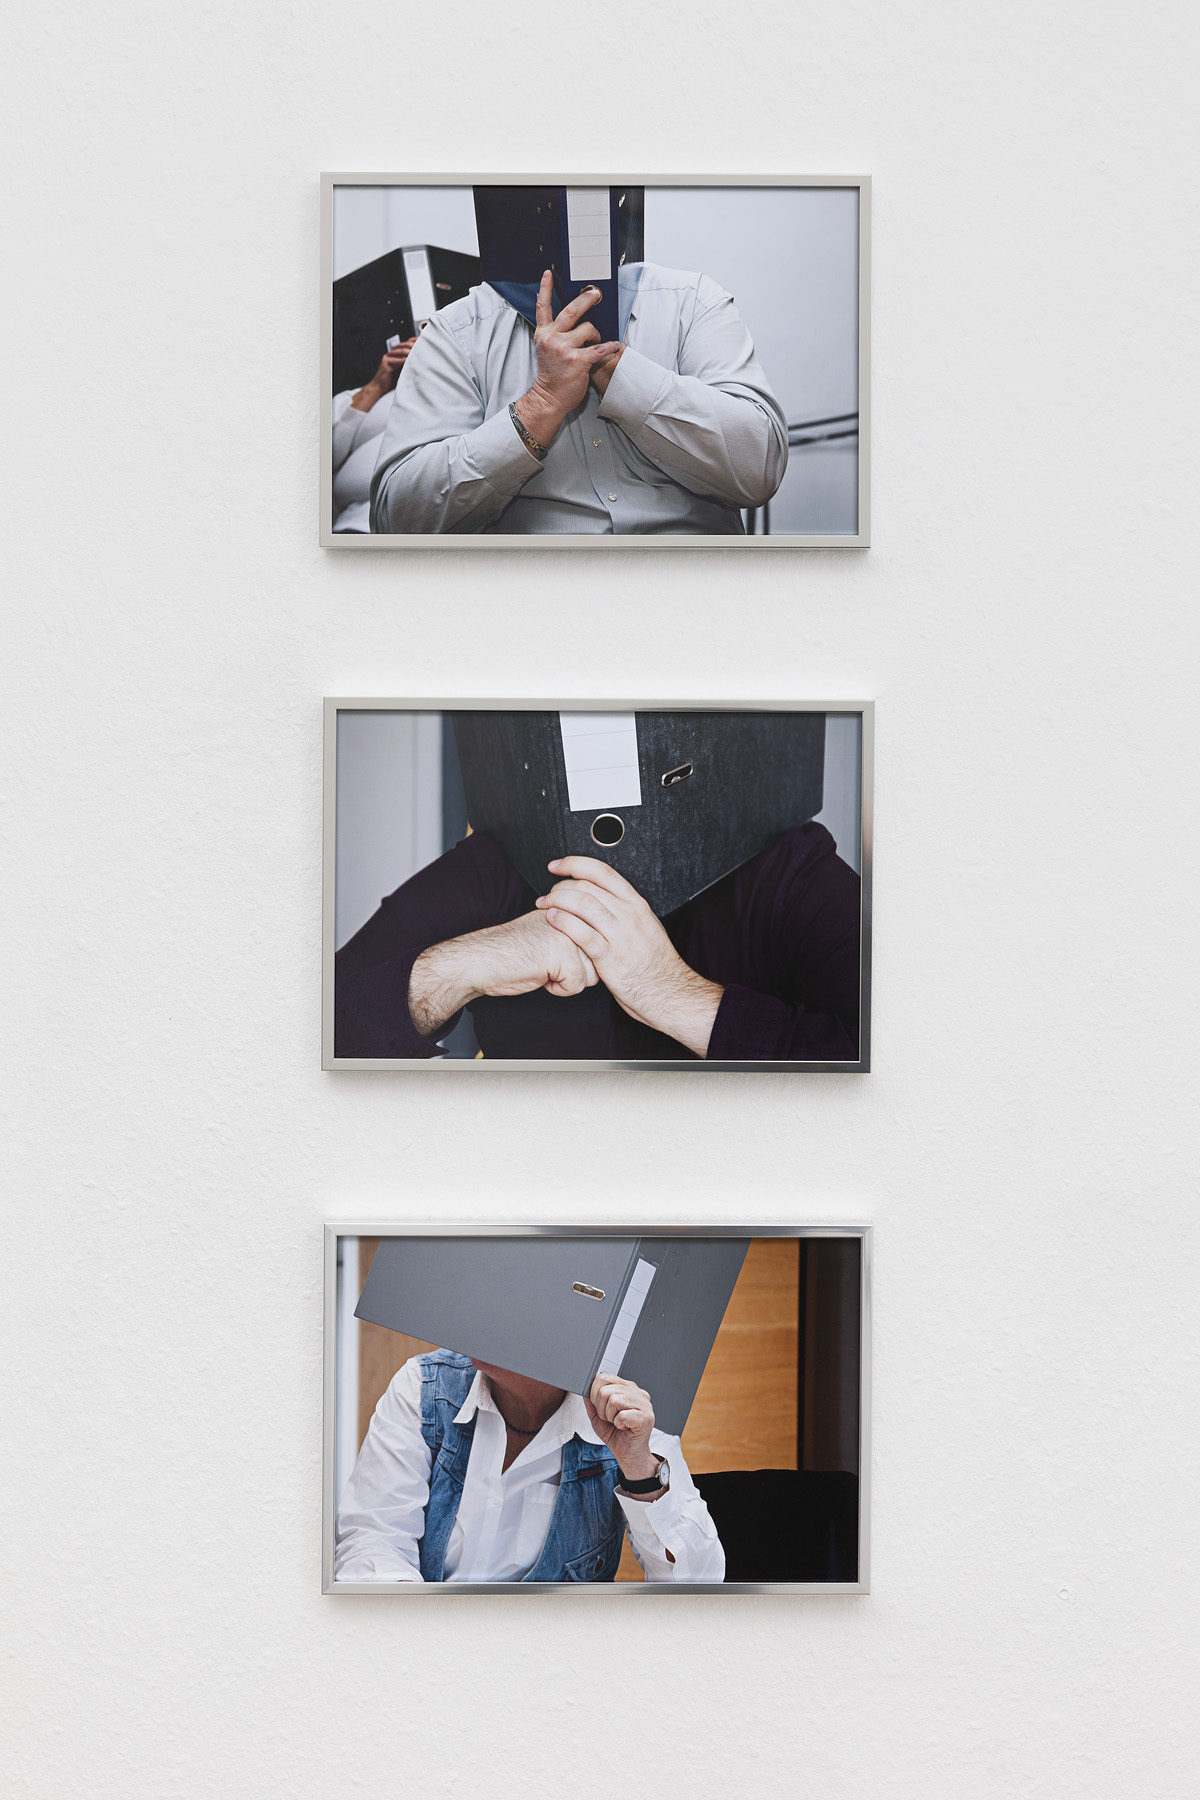 Anna Ruthenberg, Untitled, 2020-2021, series of photographs, 37x25cm.